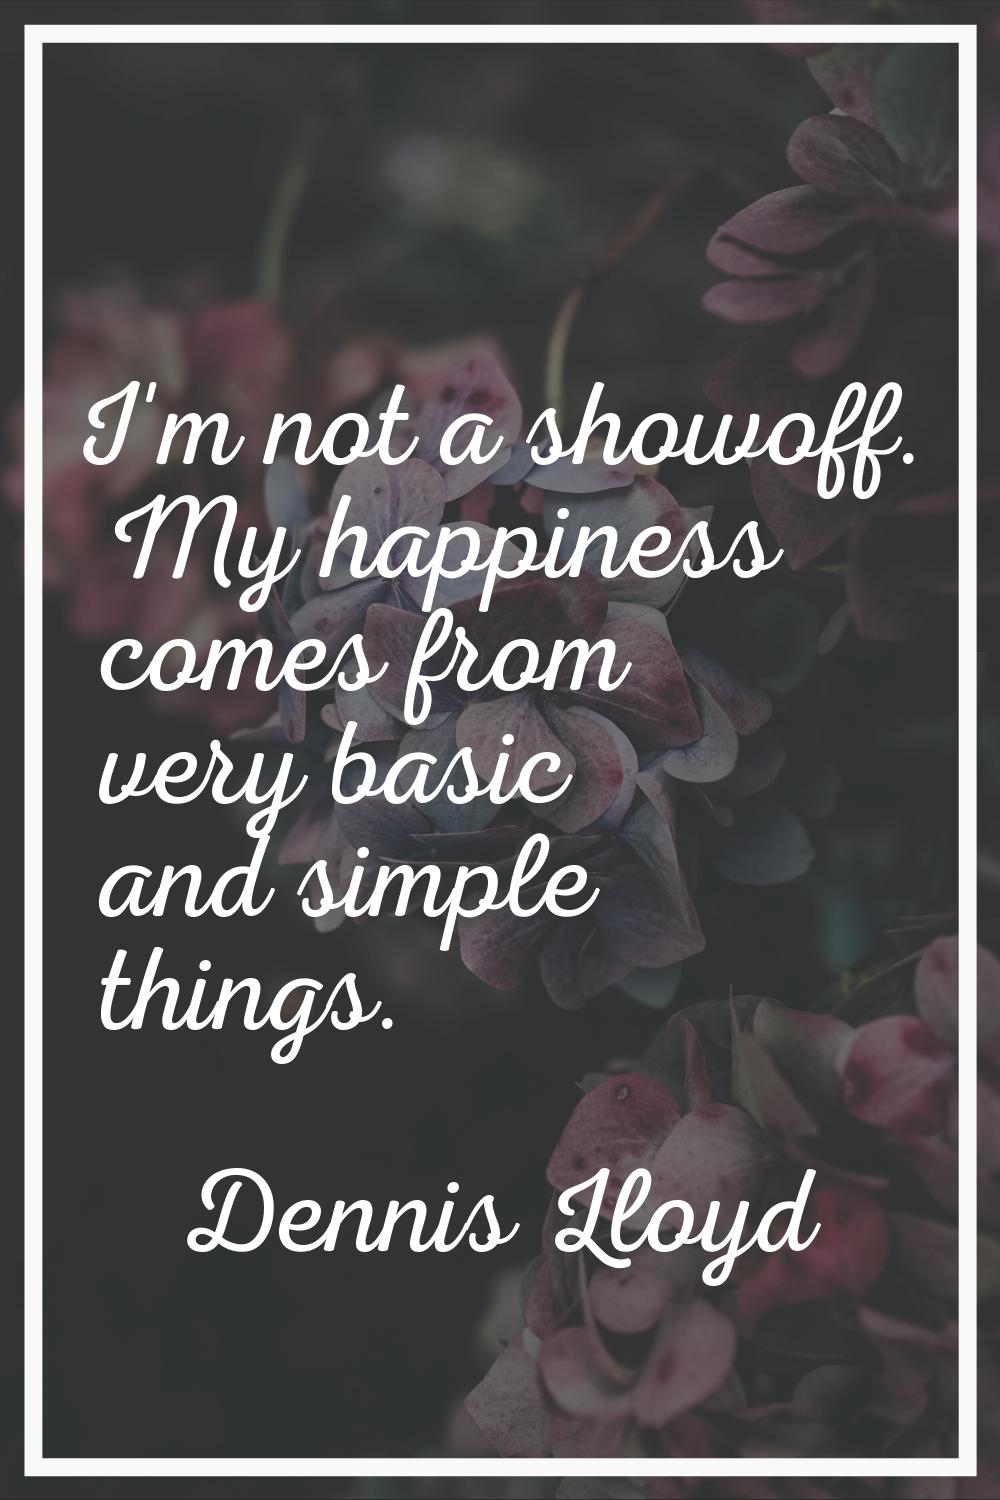 I'm not a showoff. My happiness comes from very basic and simple things.